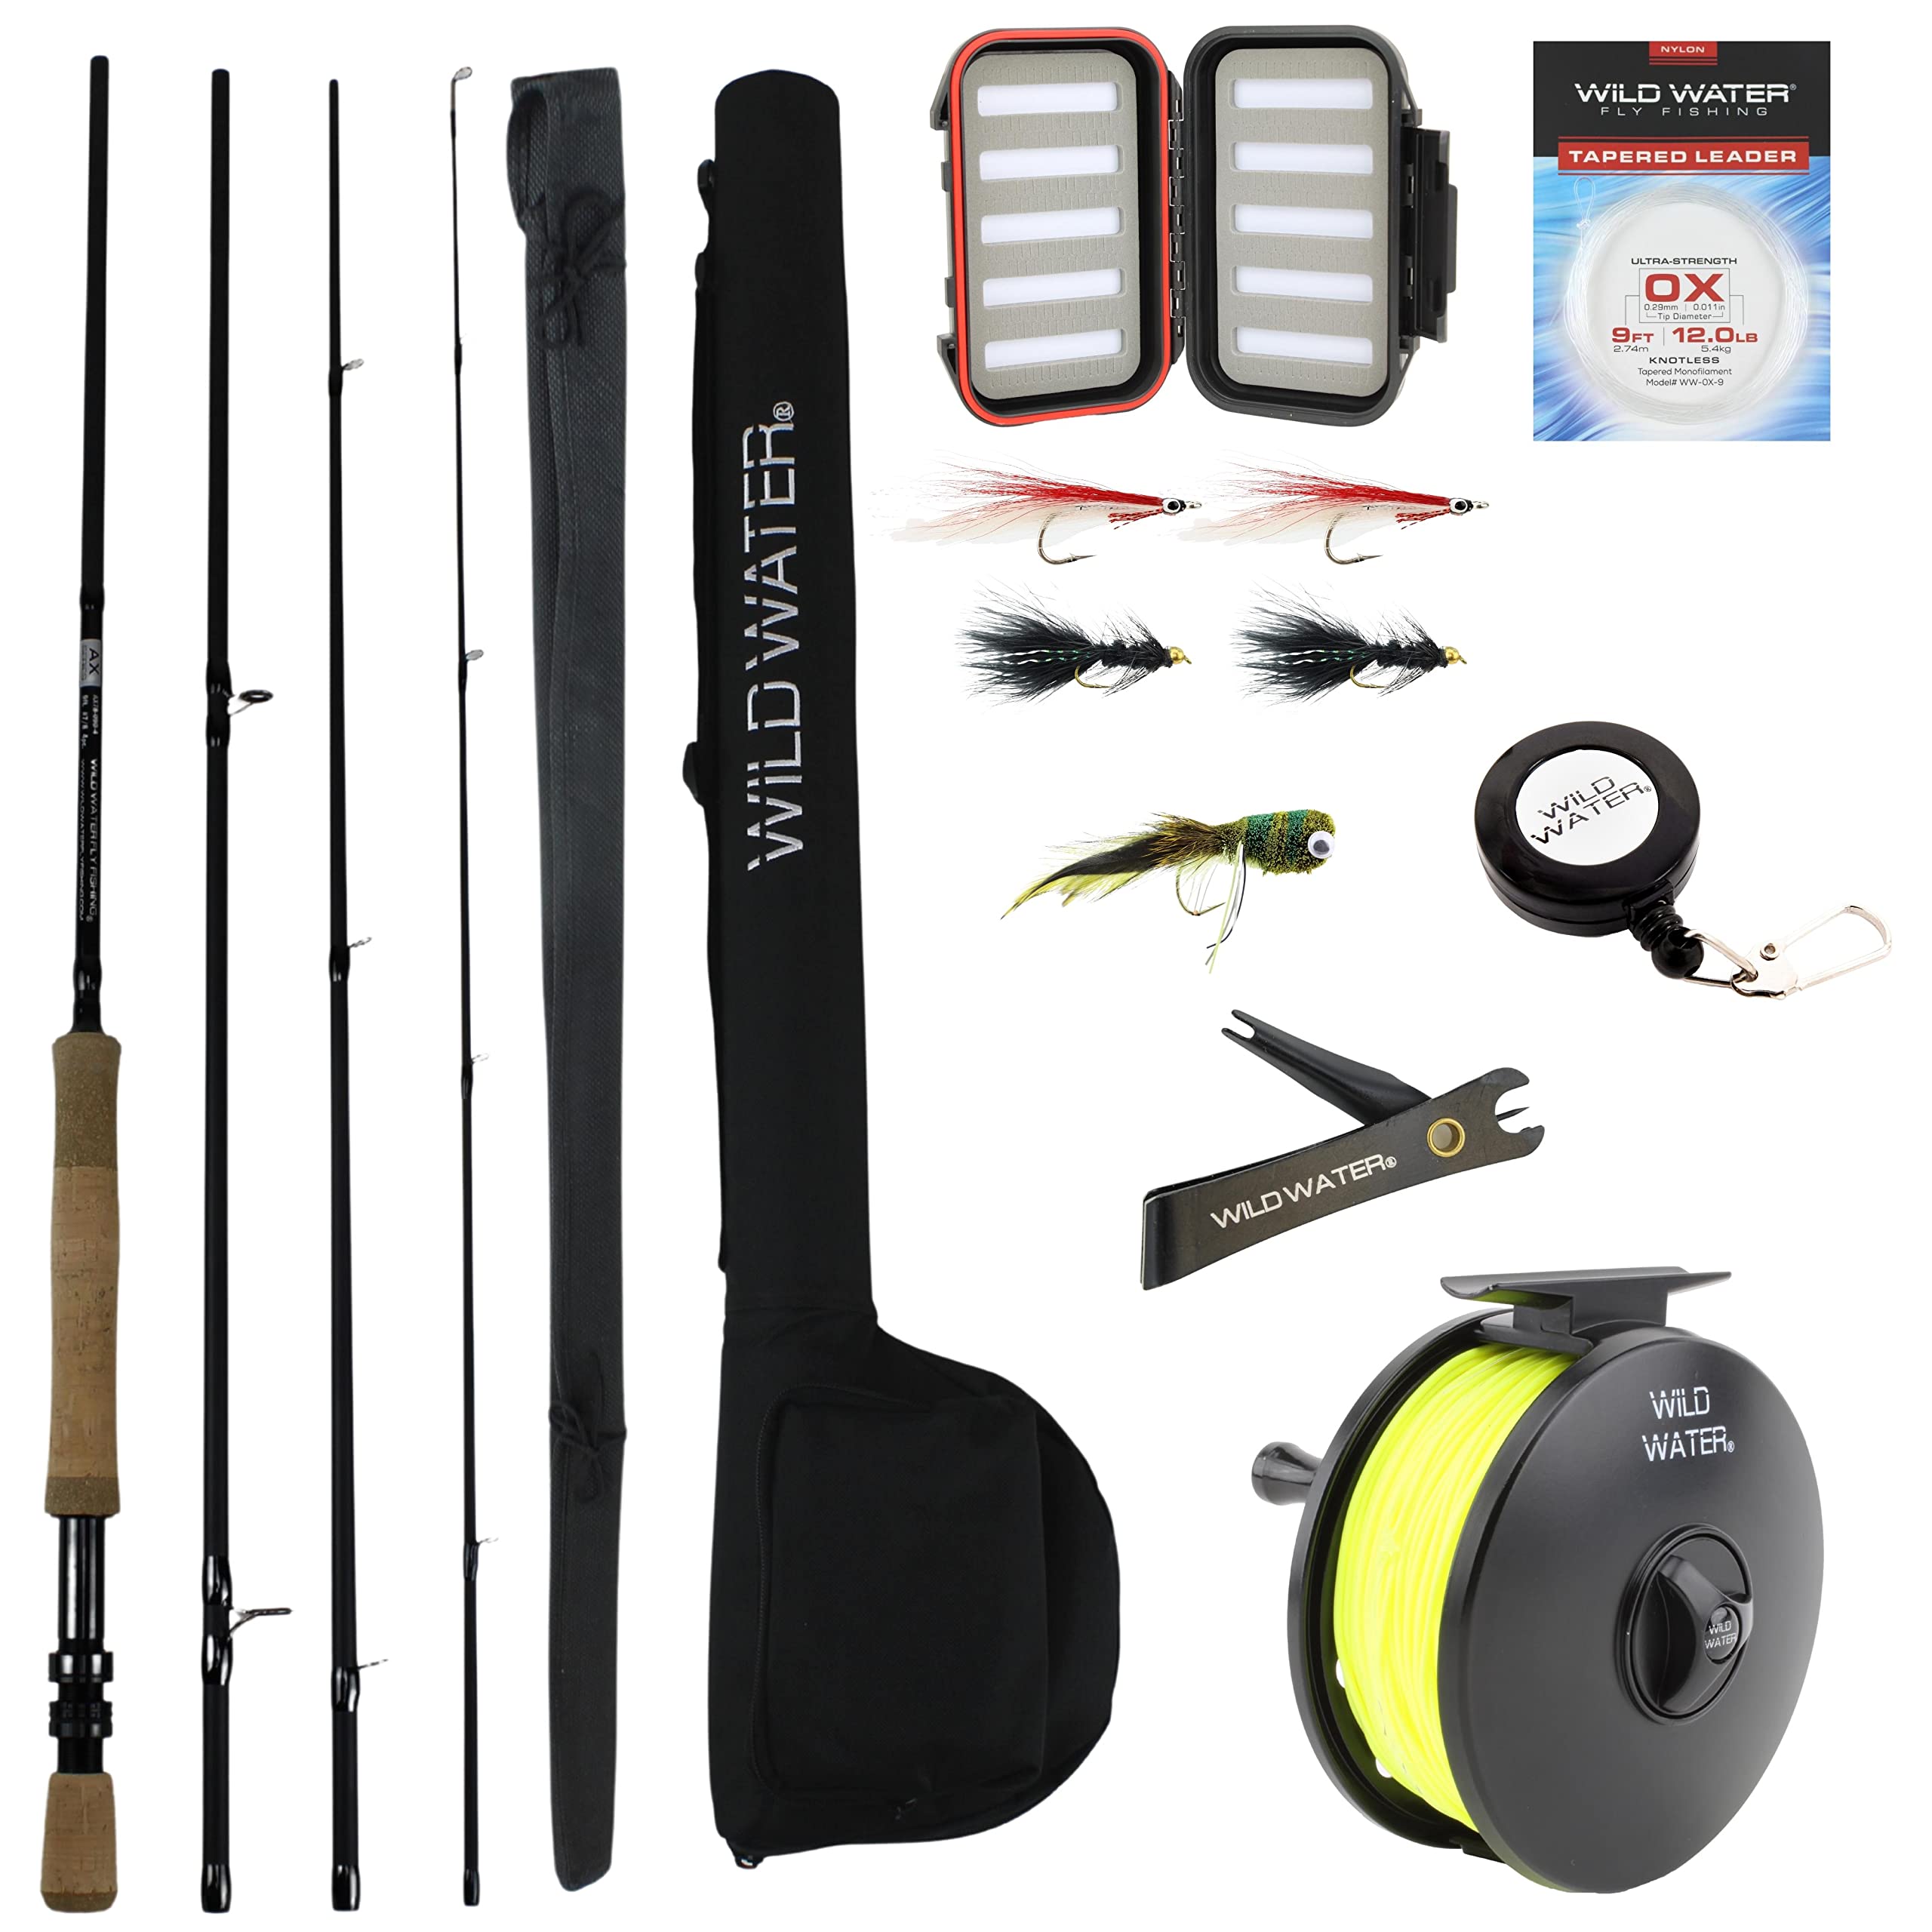 Wild Water Fly Fishing, 9 Foot, 8 Weight, 7 Piece Pack Rod and